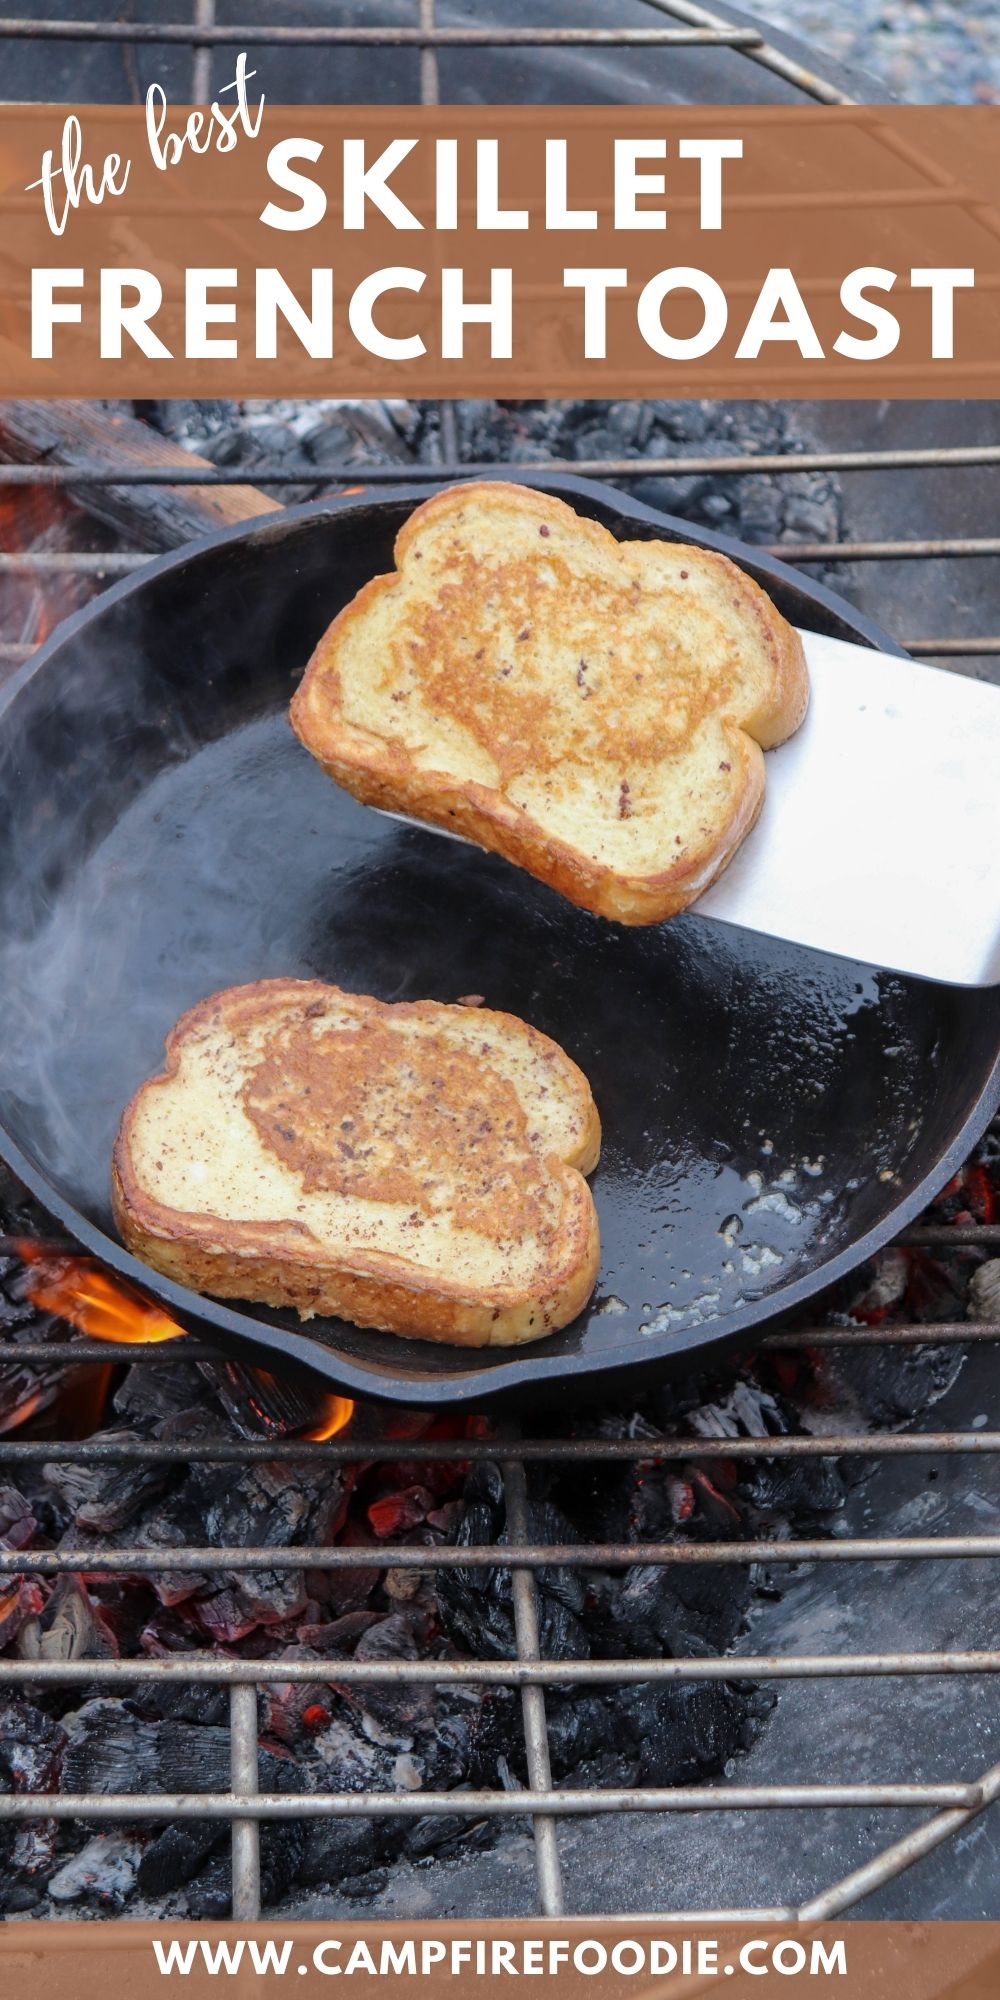 https://campfirefoodie.com/wp-content/uploads/2021/03/Skillet-French-Toast-Recipe5.jpg